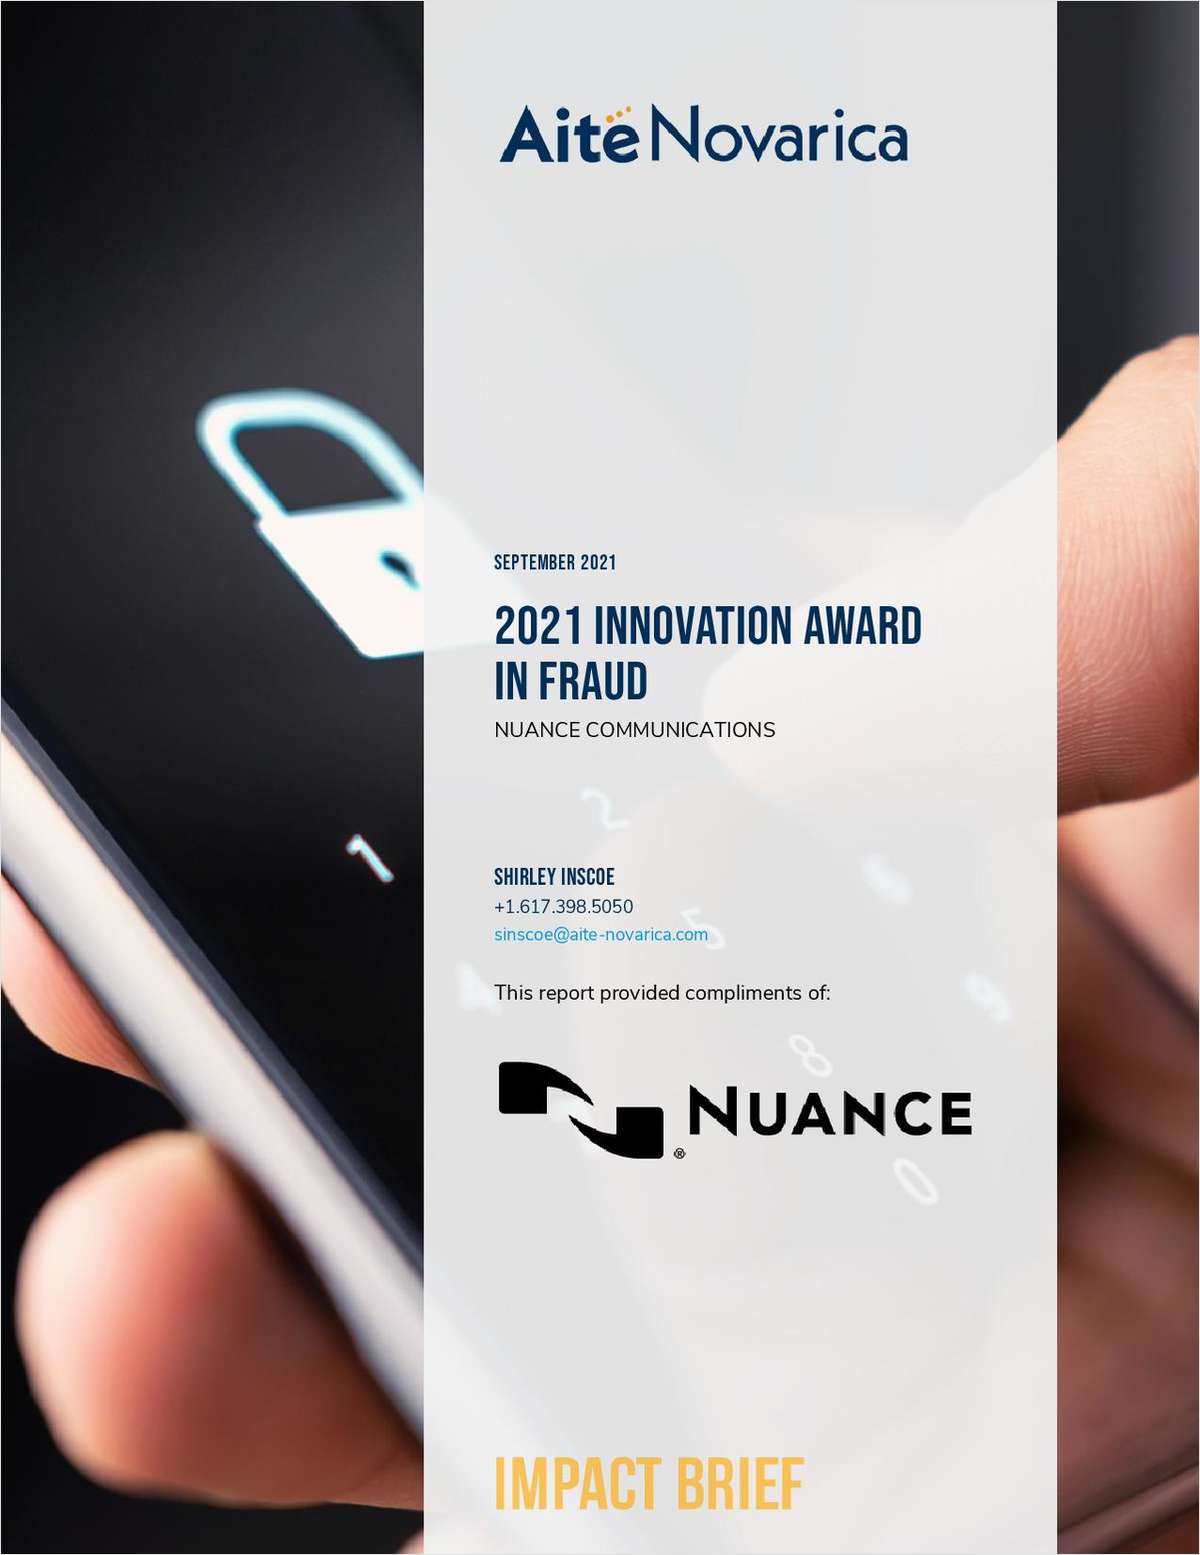 Nuance Gatekeeper - a Cloud-native Biometric Security Solution with up to 99% success rates.